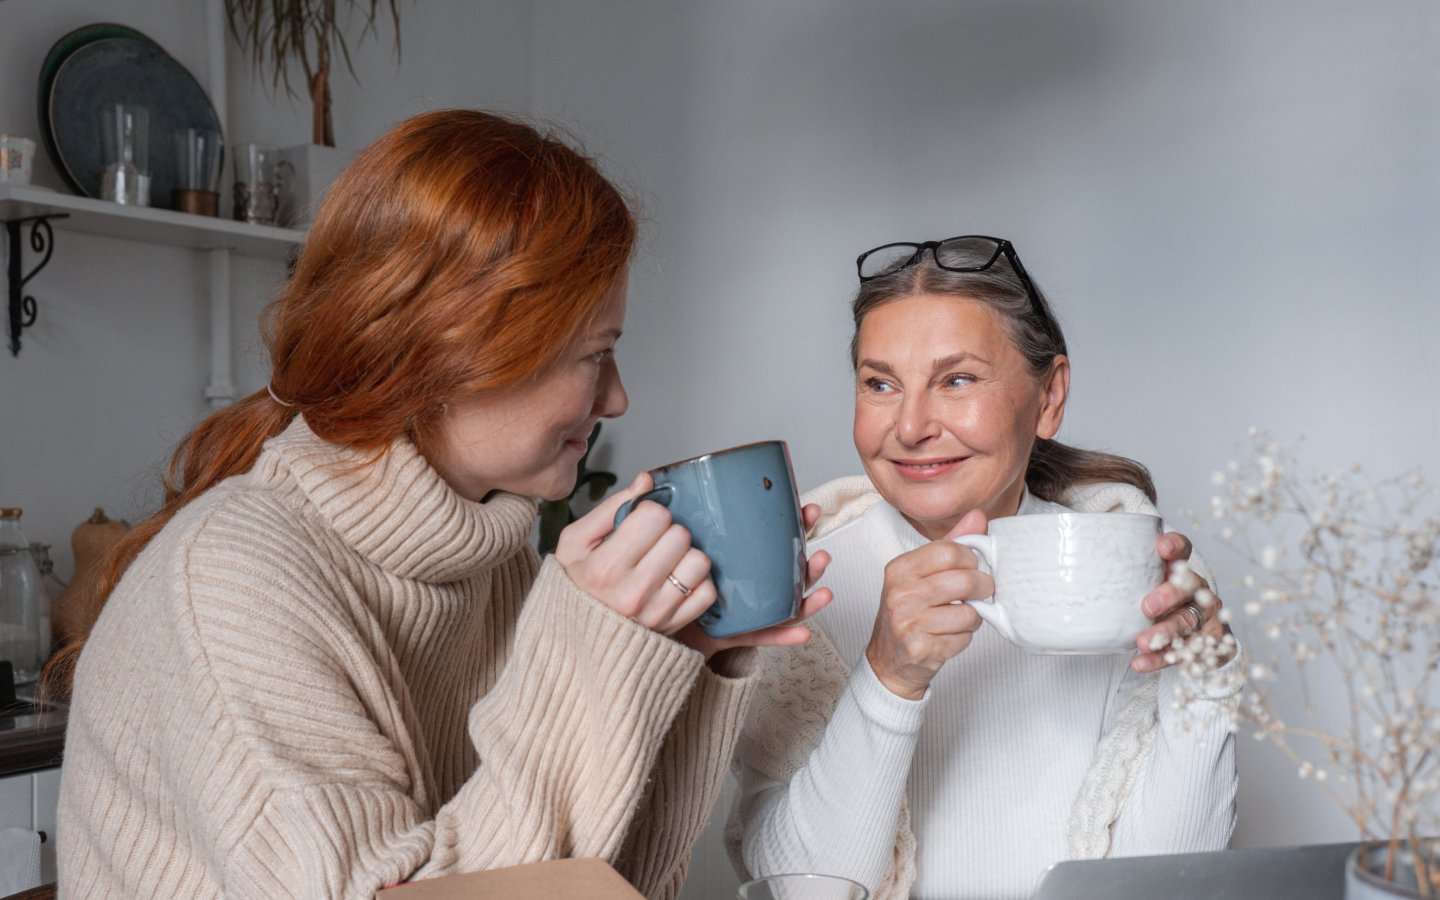 Mom and daughter drinking coffee together